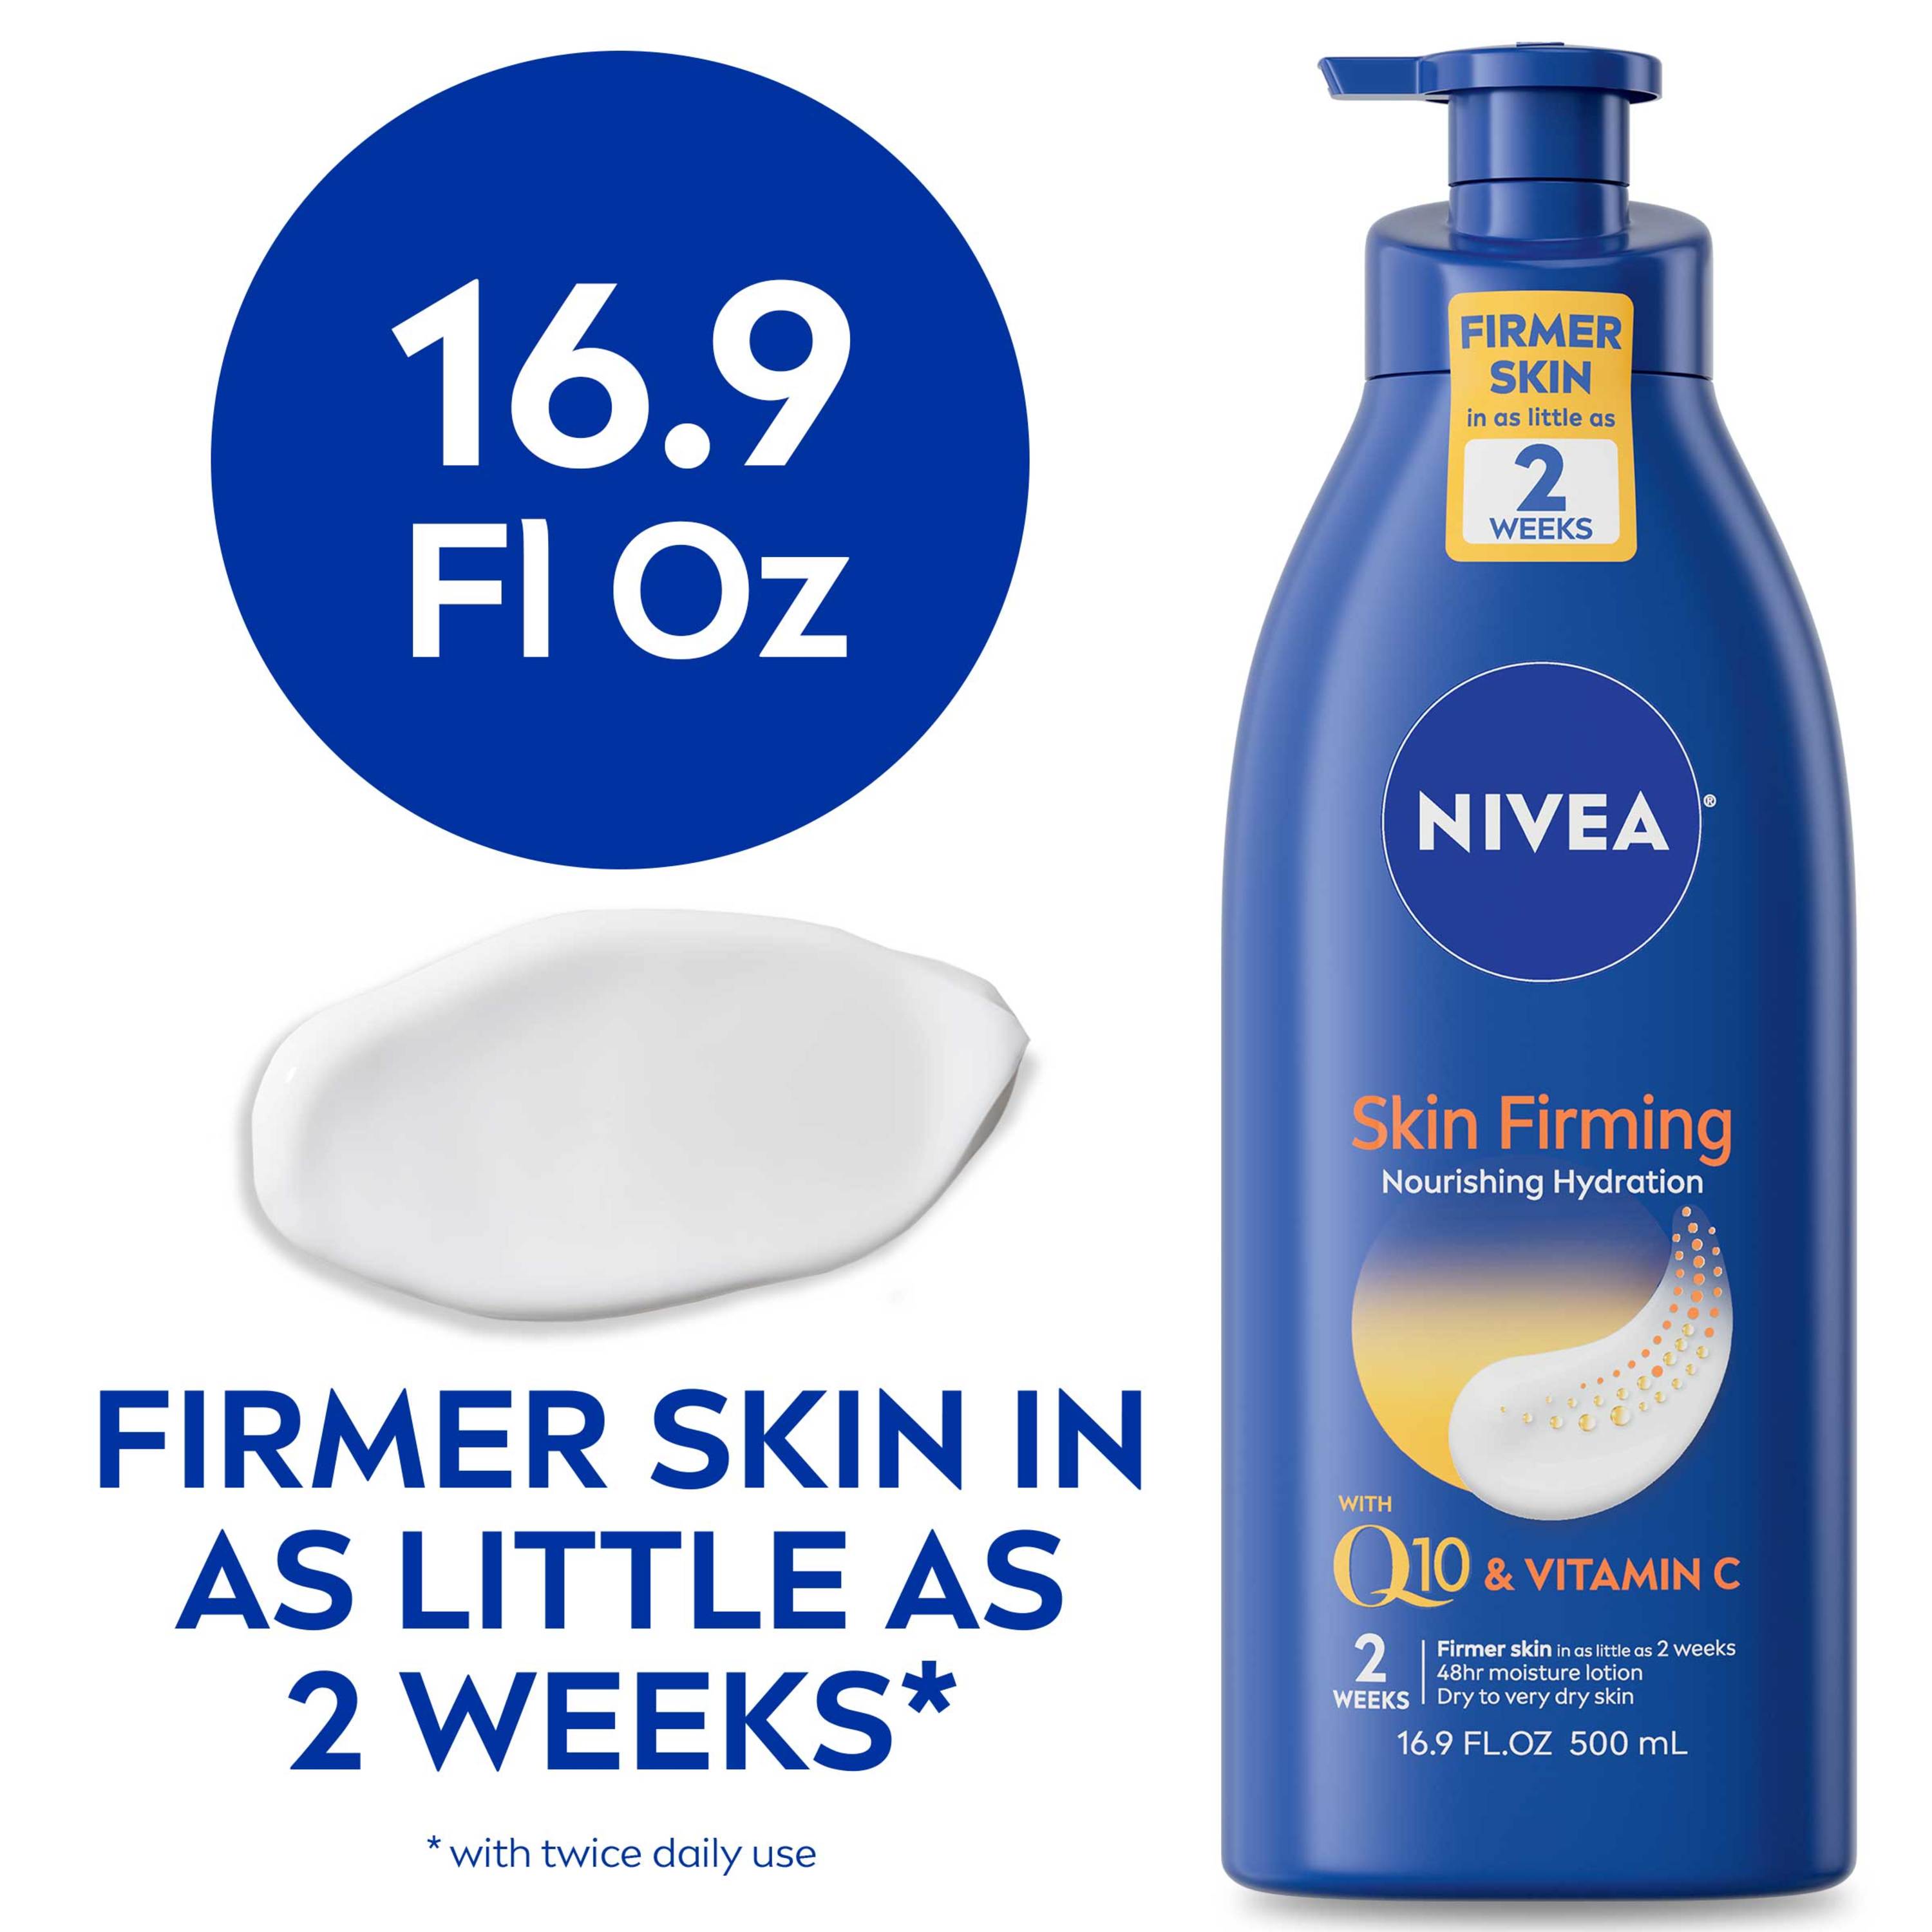 NIVEA Nourishing Skin Firming Body Lotion with Q10 and Vitamin C, 16.9 Fl Oz Pump Bottle - image 1 of 14